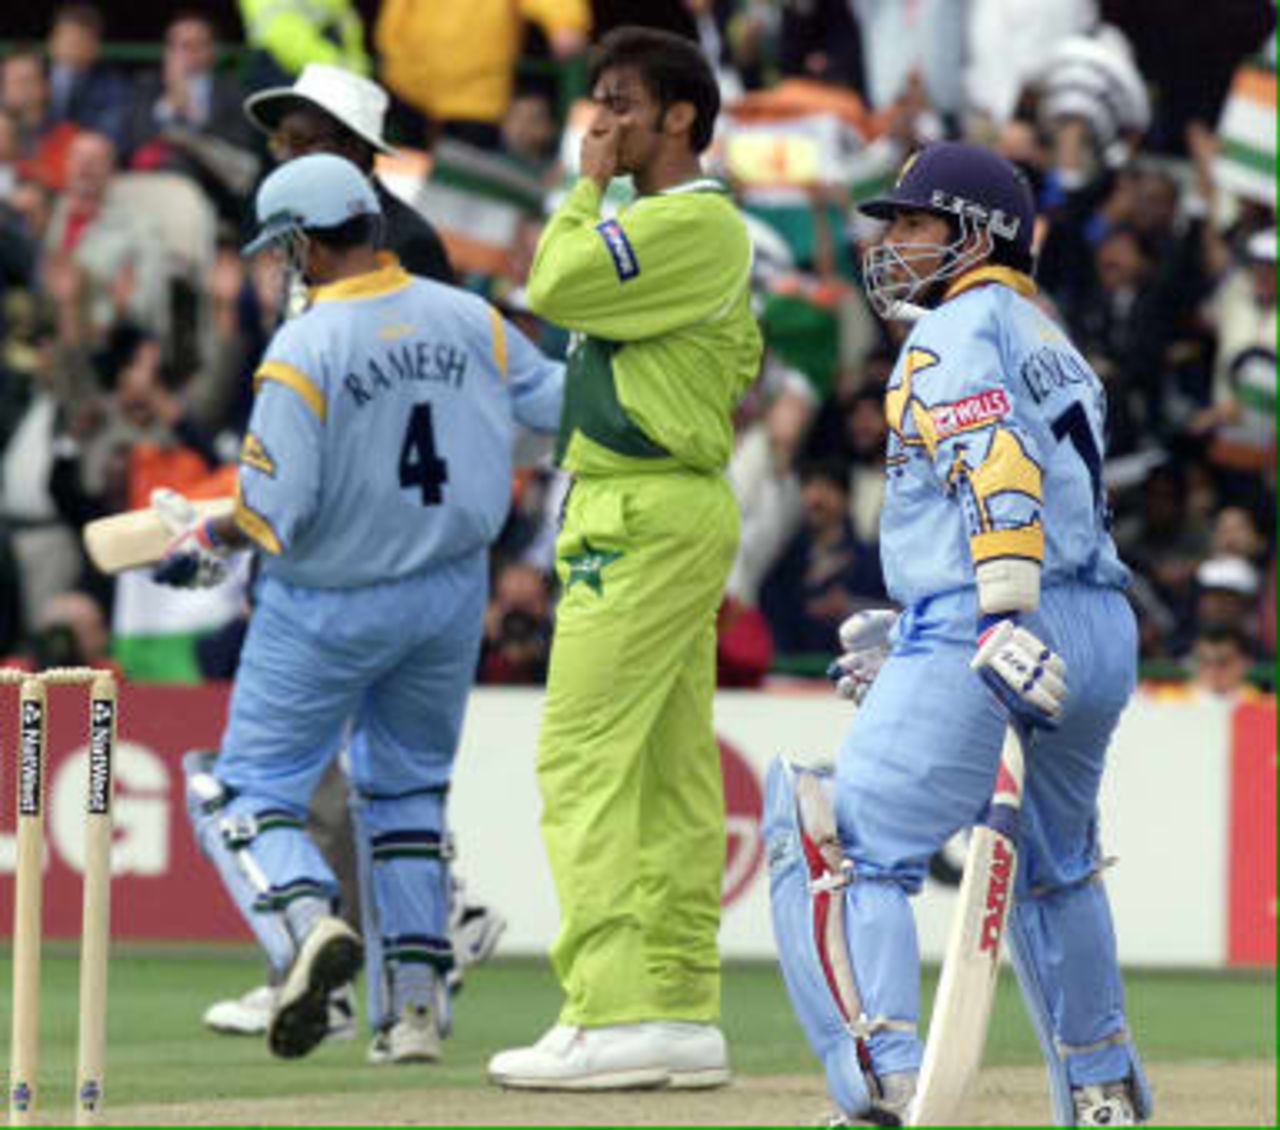 Pakistan`s Shoaib Akhtar (C) stands between India's openers Sadagopan Ramesh and Sachin Tendulkar at Old Trafford 08 June 1999 during the super six match of the Cricket World Cup match in Manchester